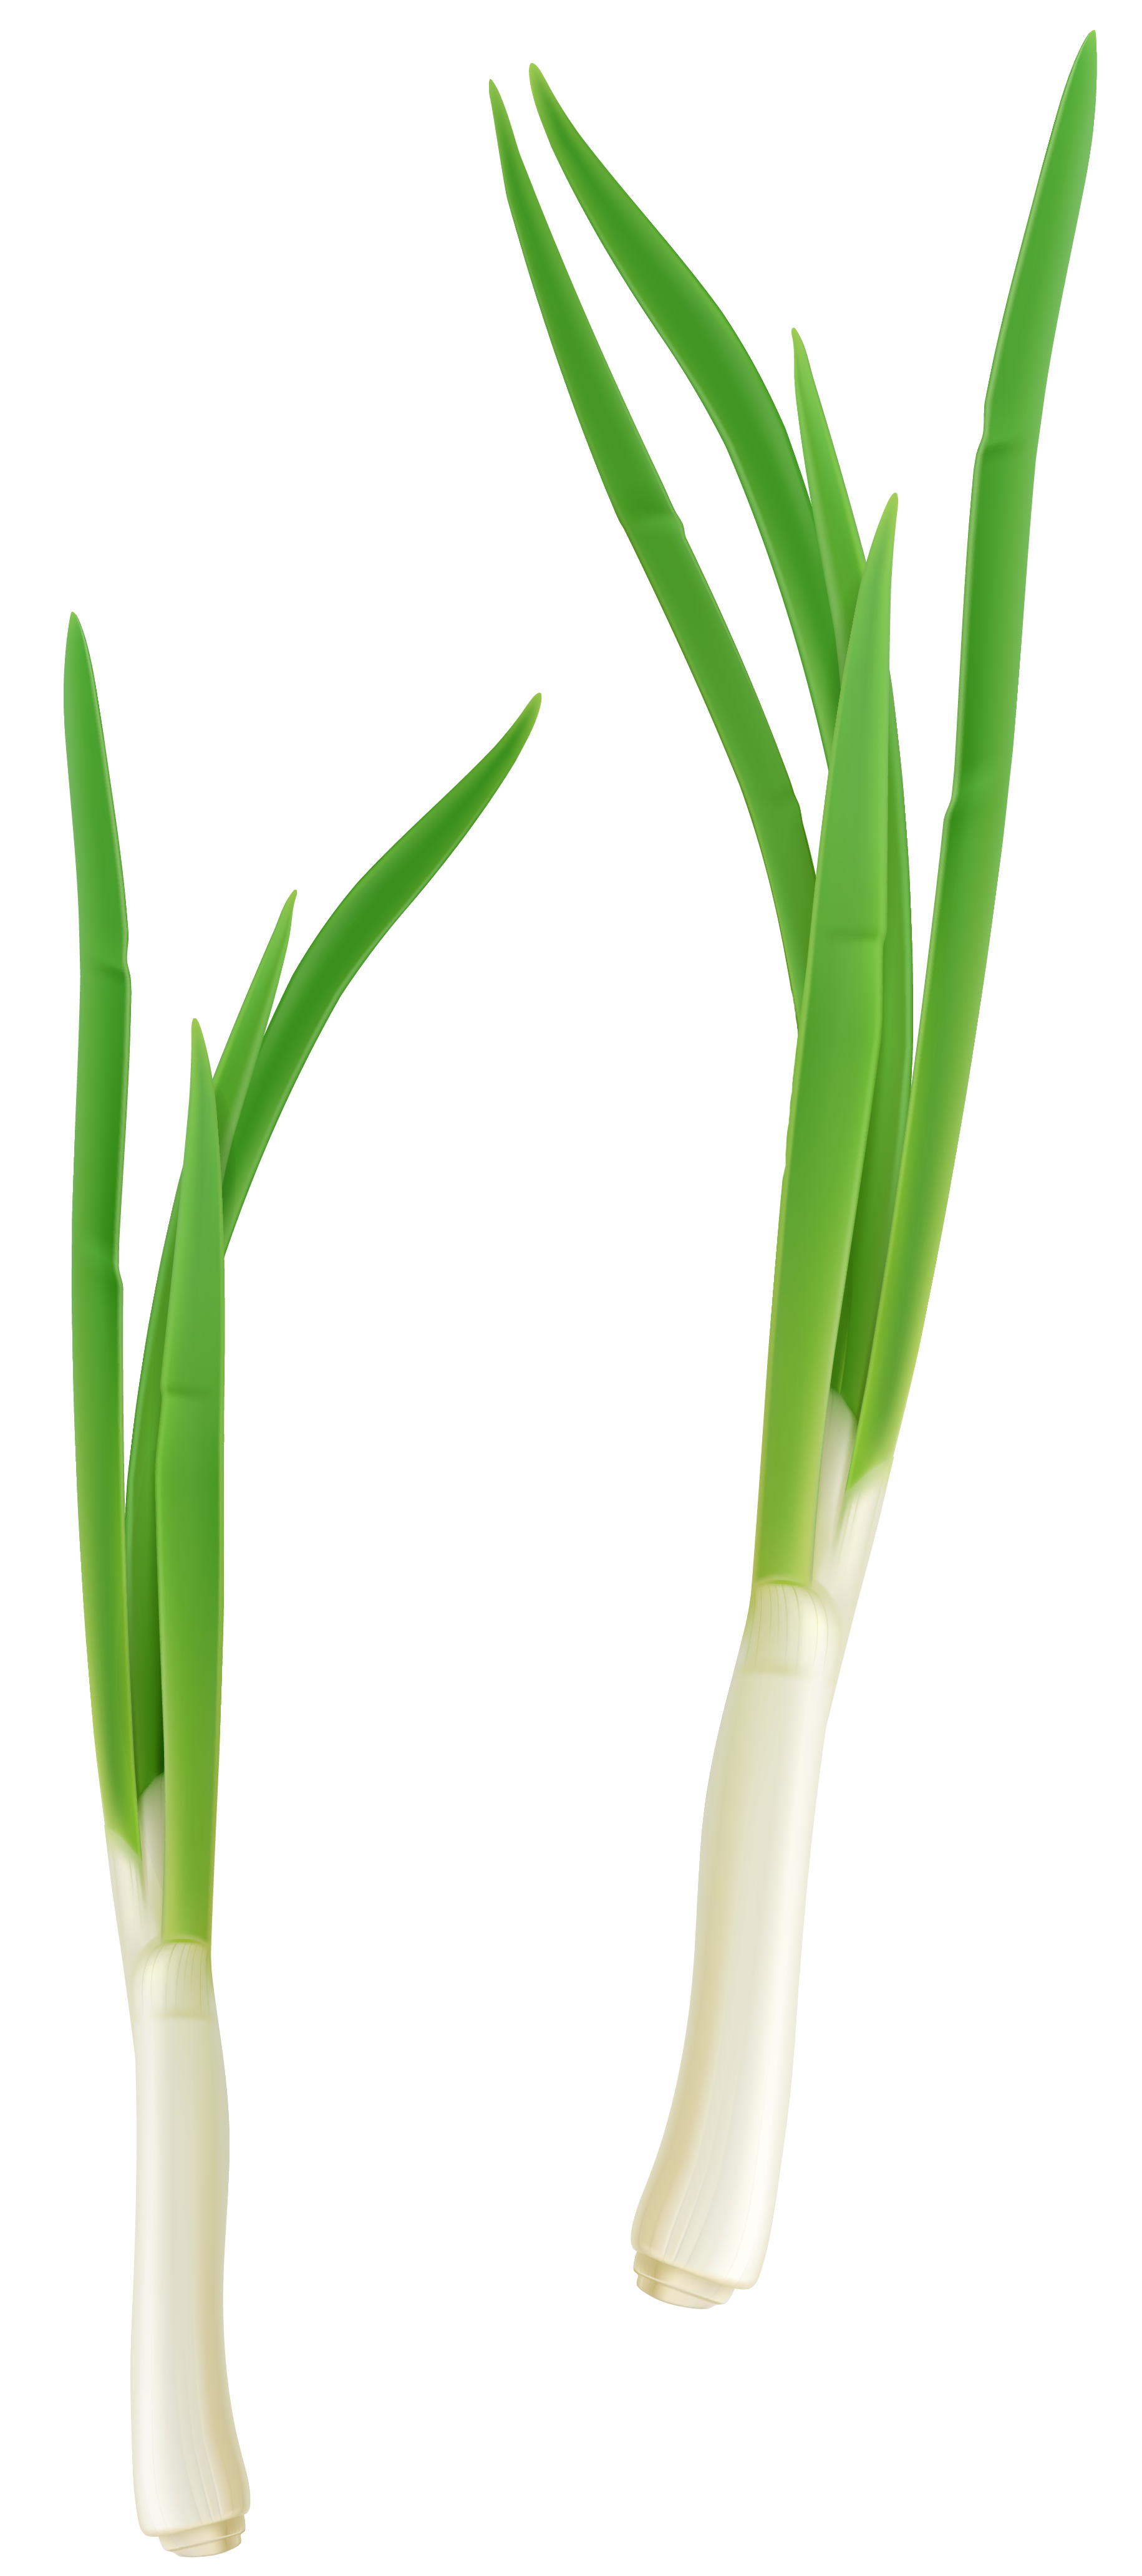 Green fresh png gallery. Onion clipart vintage